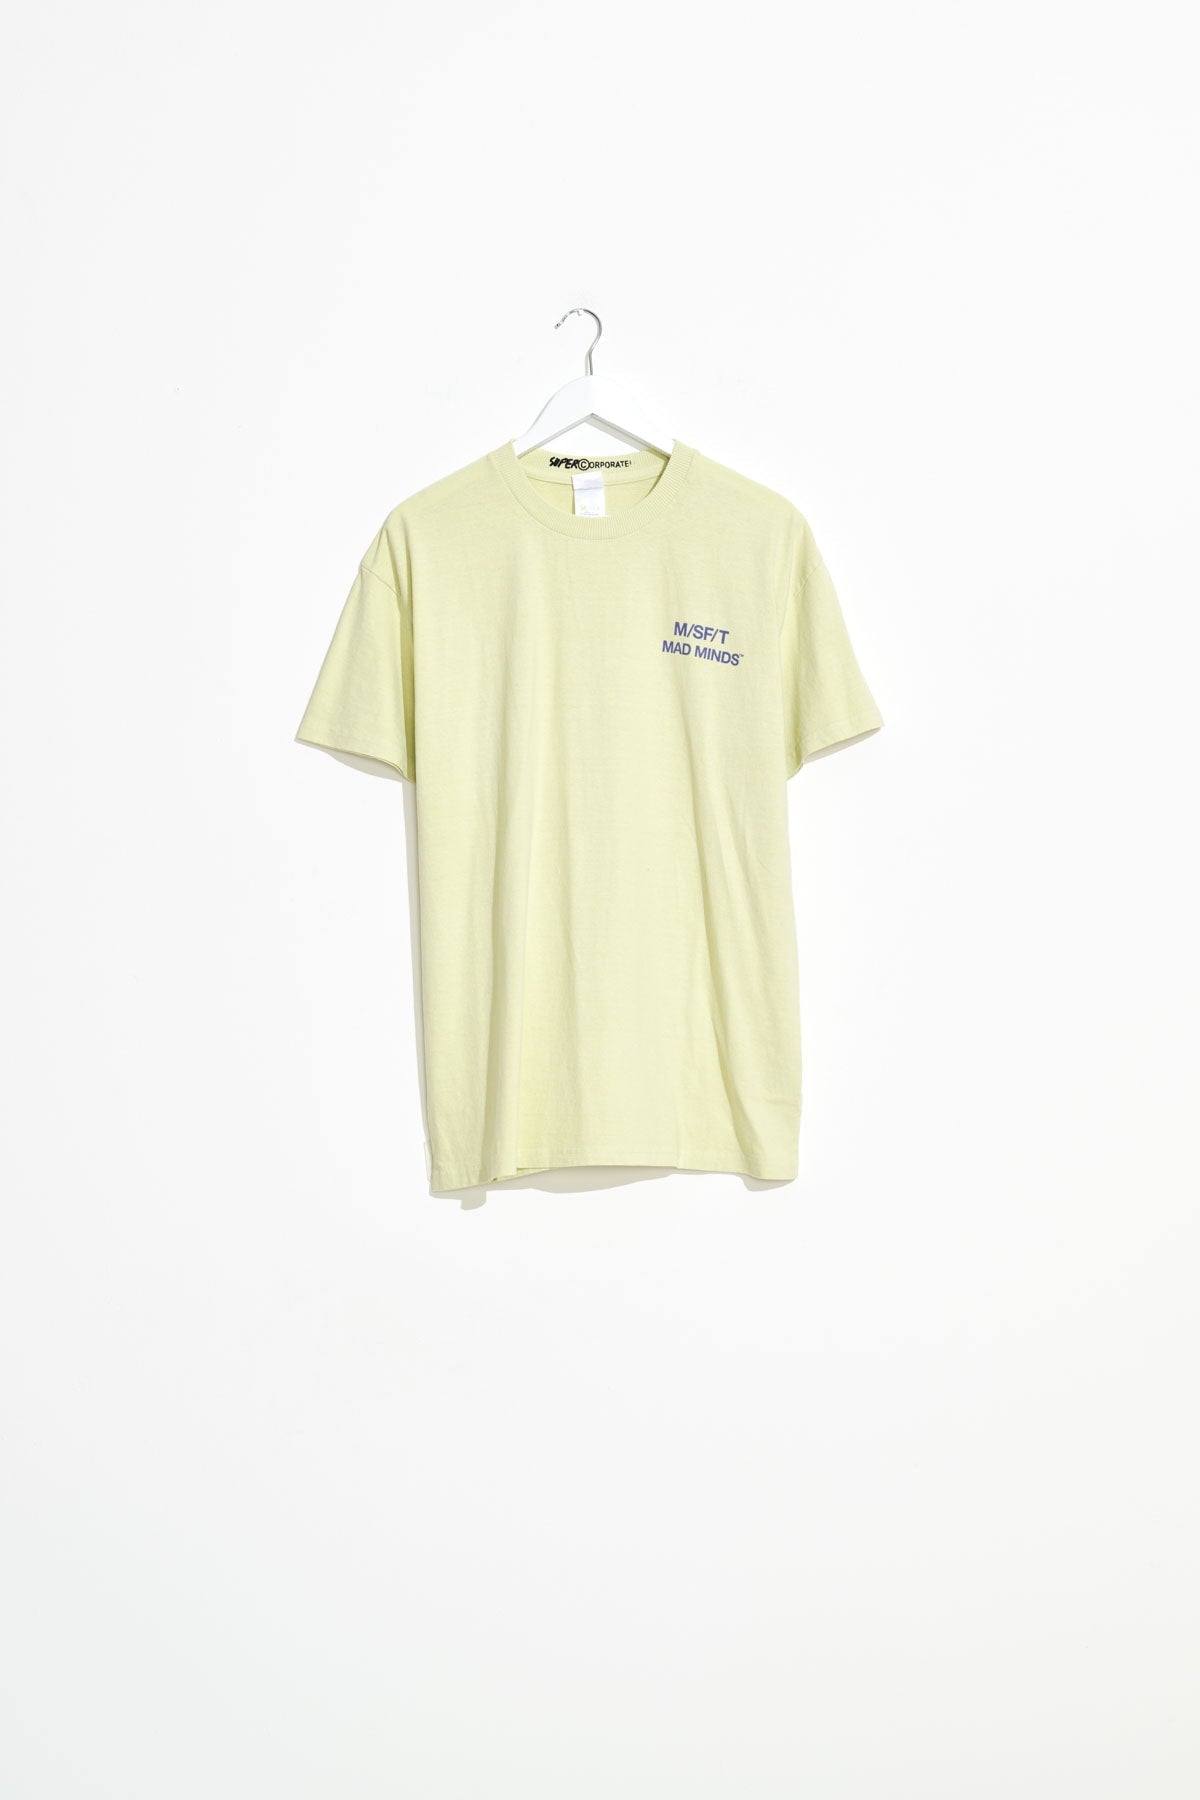 Misfit Shapes - Supercorporate 3.0 SS Tee - Pigment Wasabi